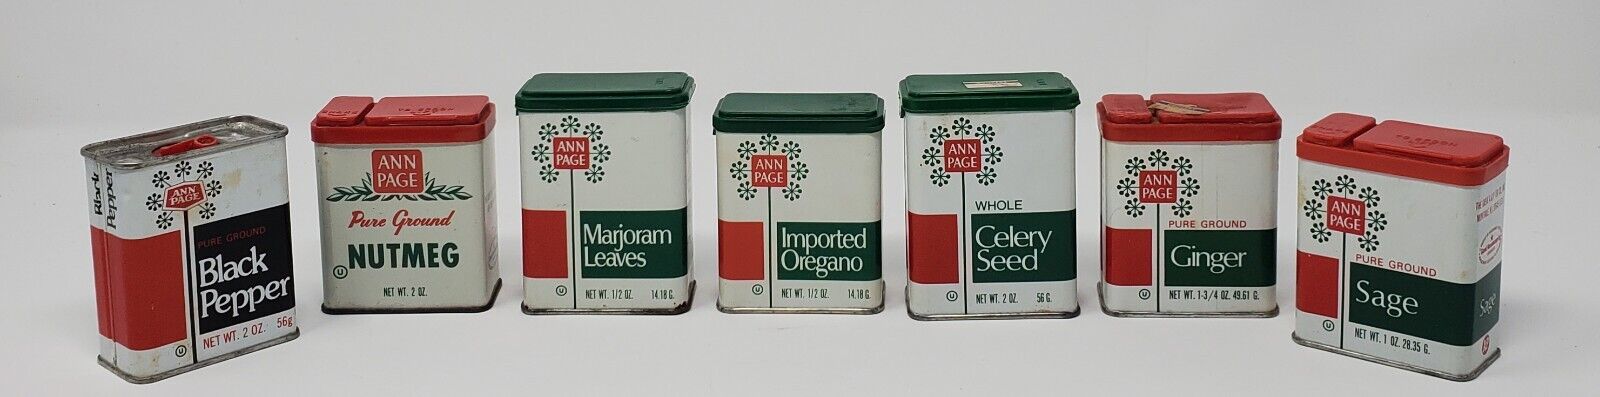 Lot of 7 Vintage Ann Page Small Metal Kitchen Spice Tins MCM A&P Grocery GUC